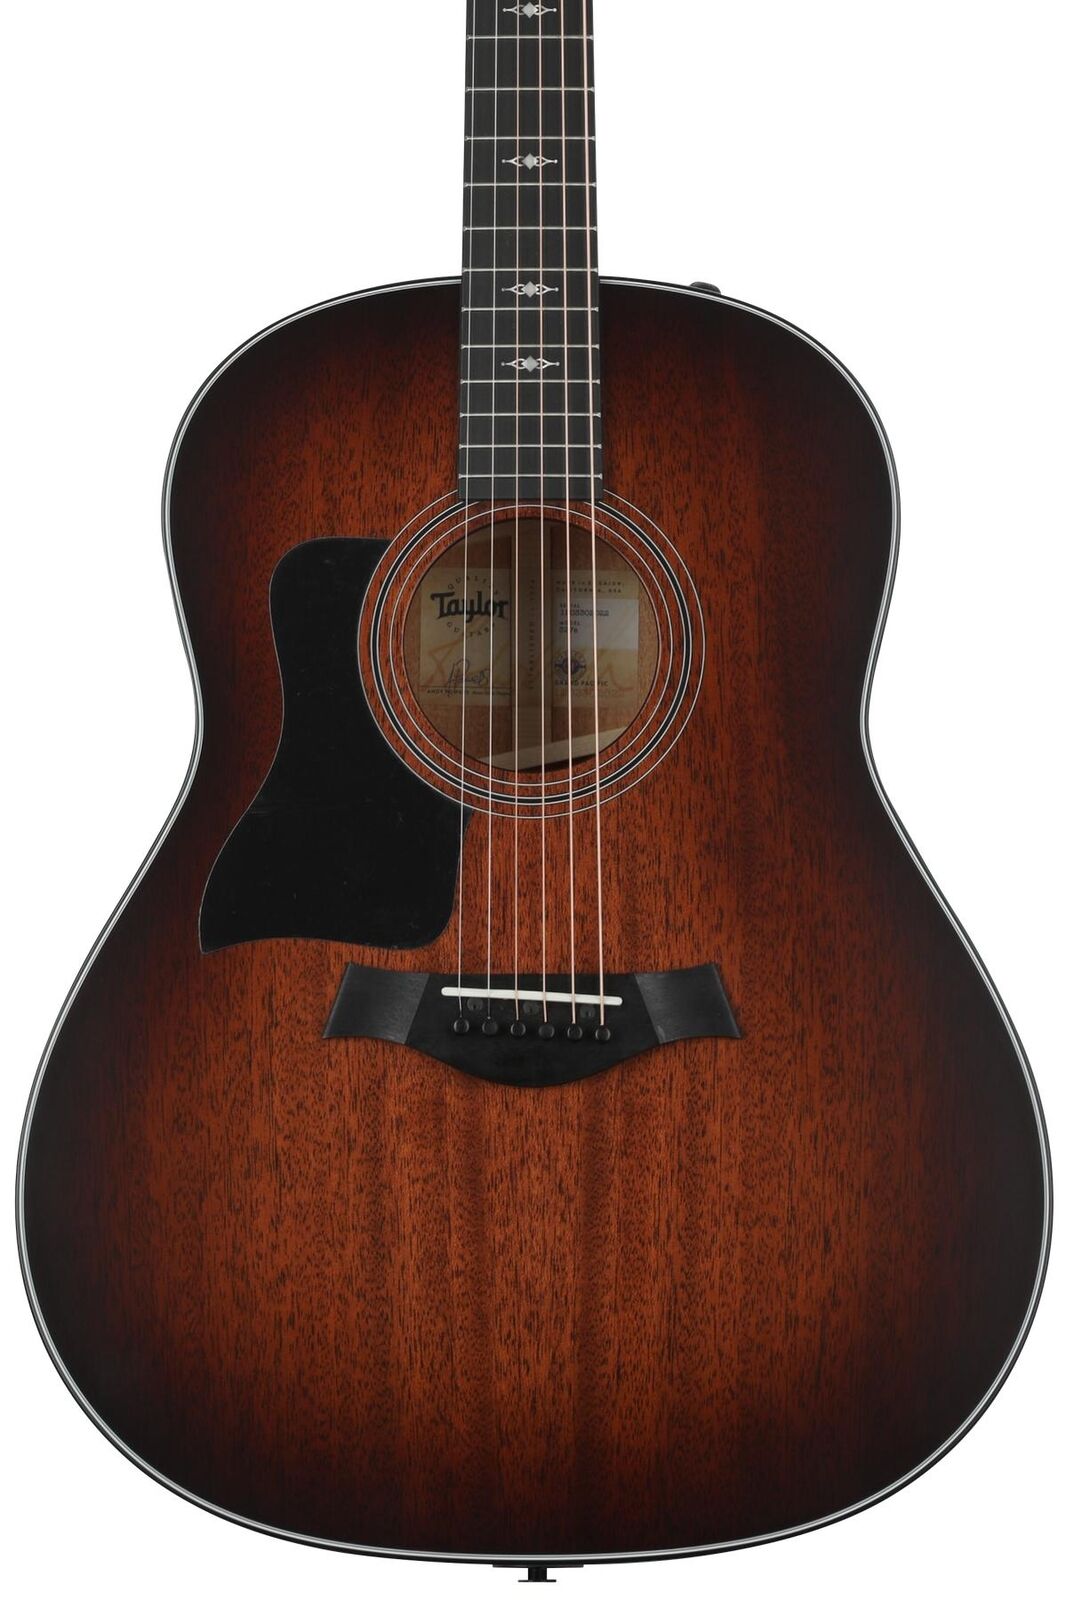 Taylor 327e Grand Pacific Left-handed Acoustic-electric Guitar - Shaded Edge